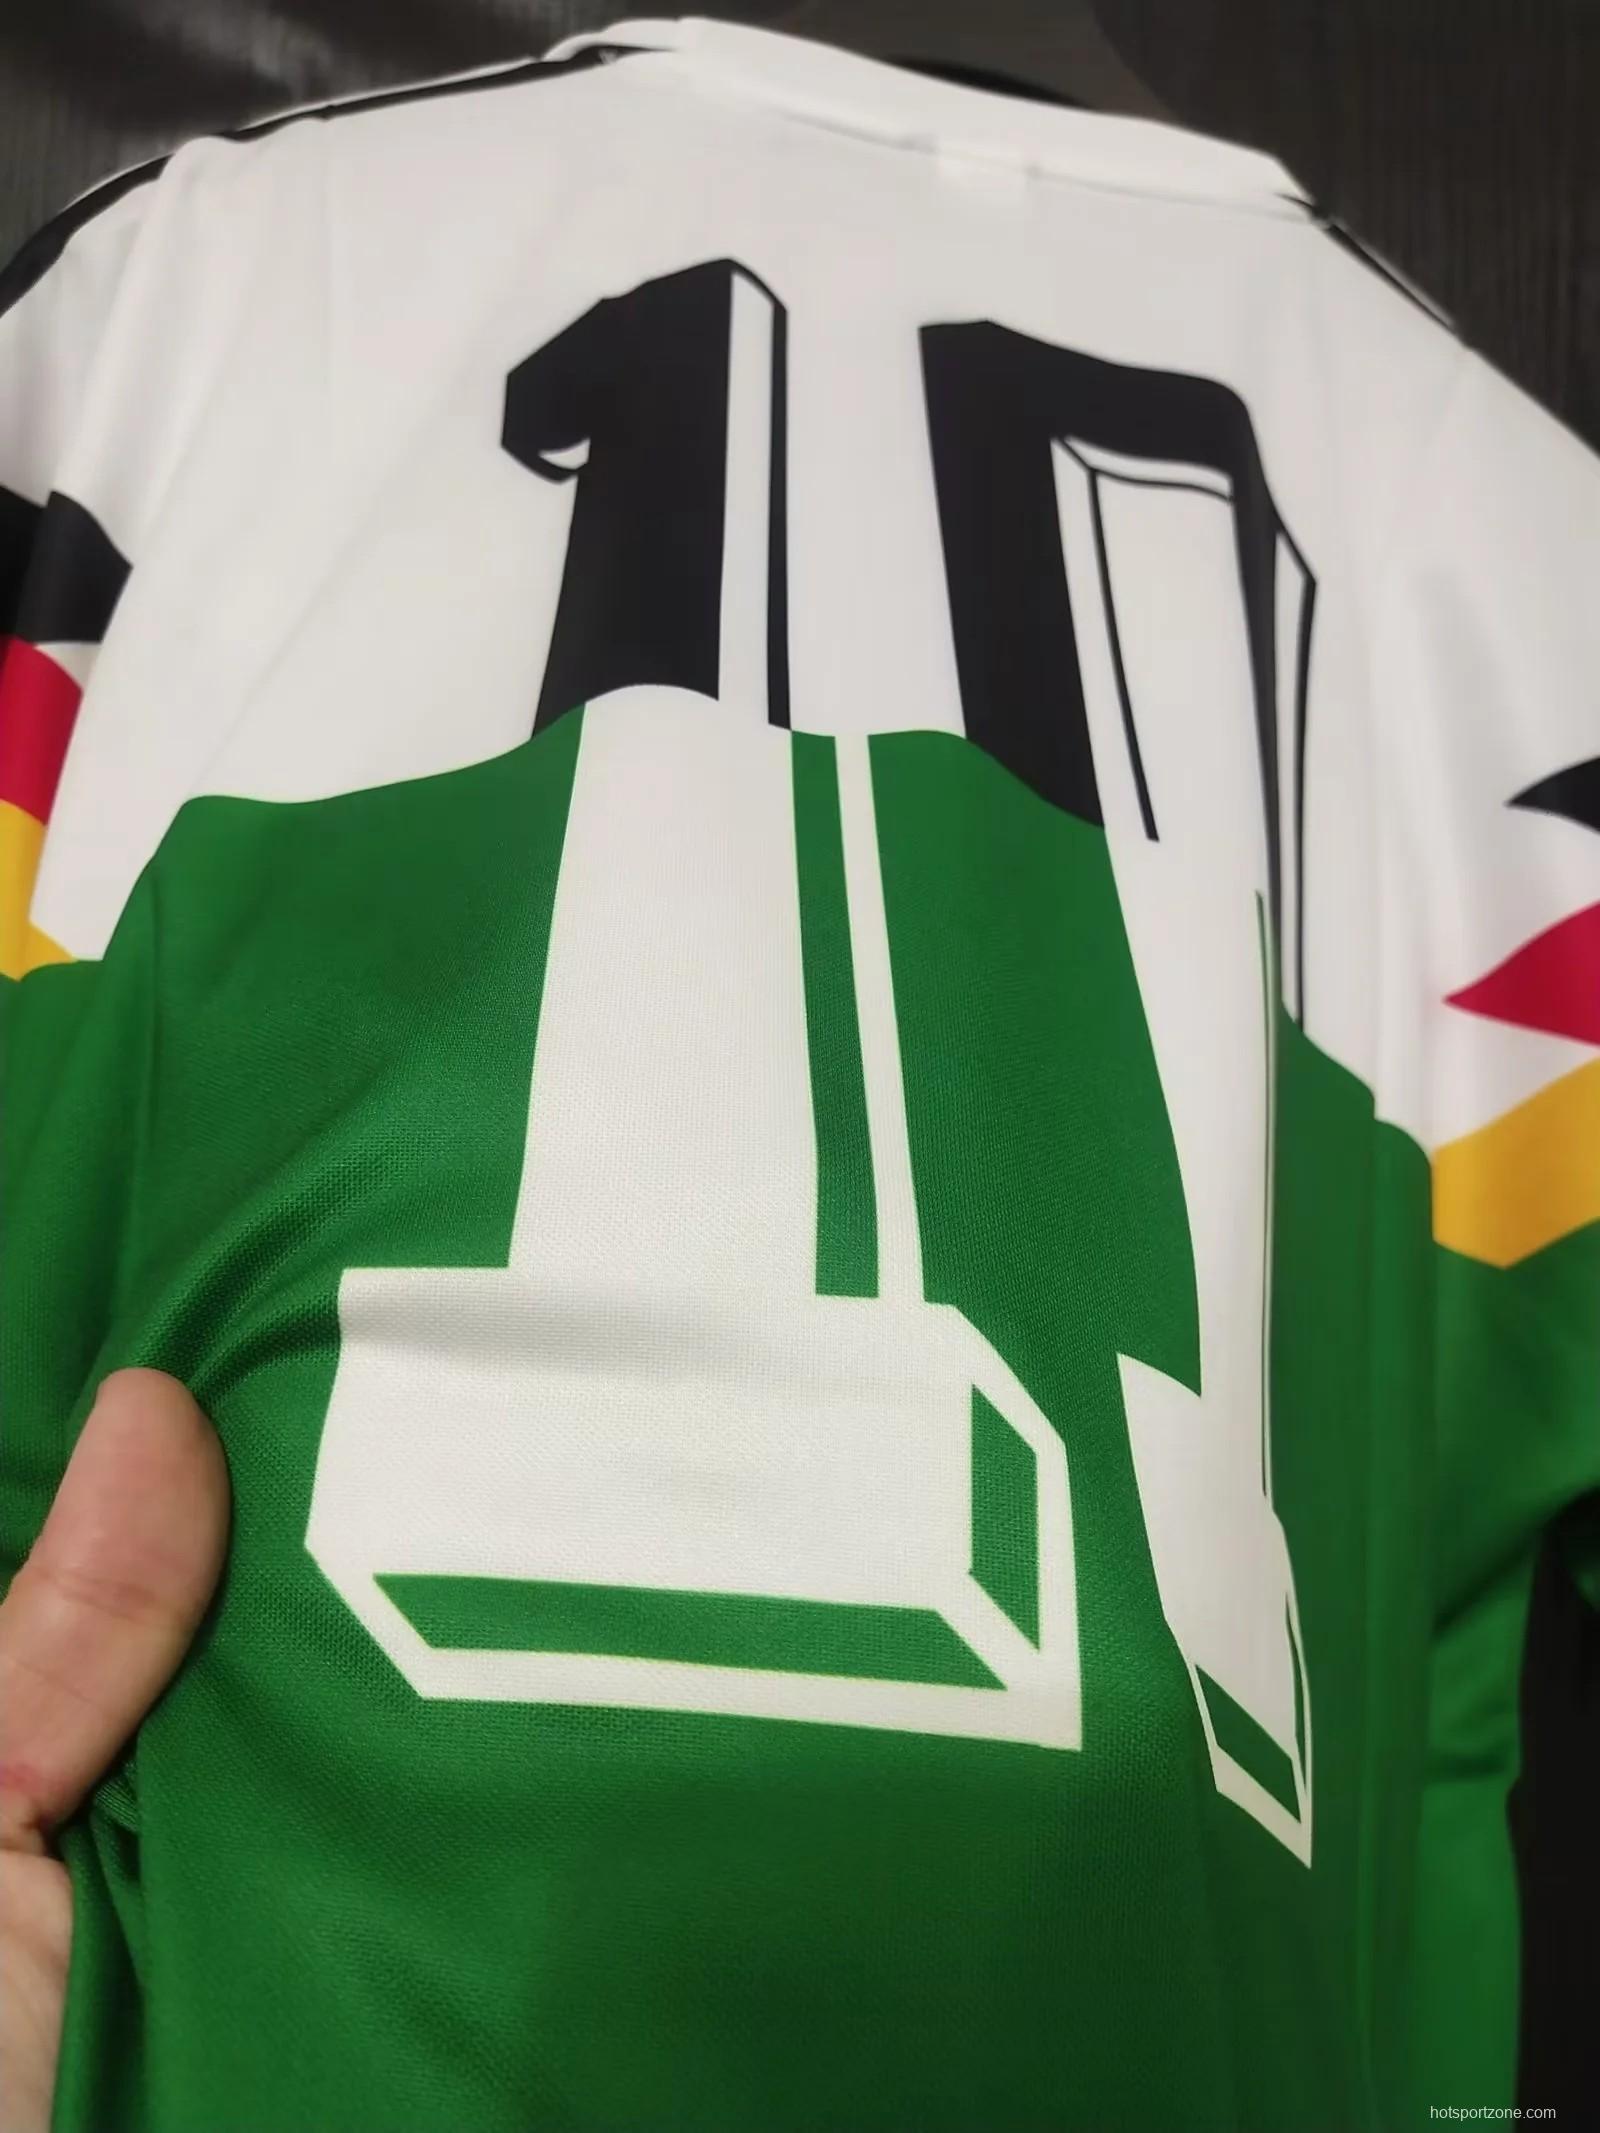 Retro1990 Germany Home With Mash-up Strip green Jersey